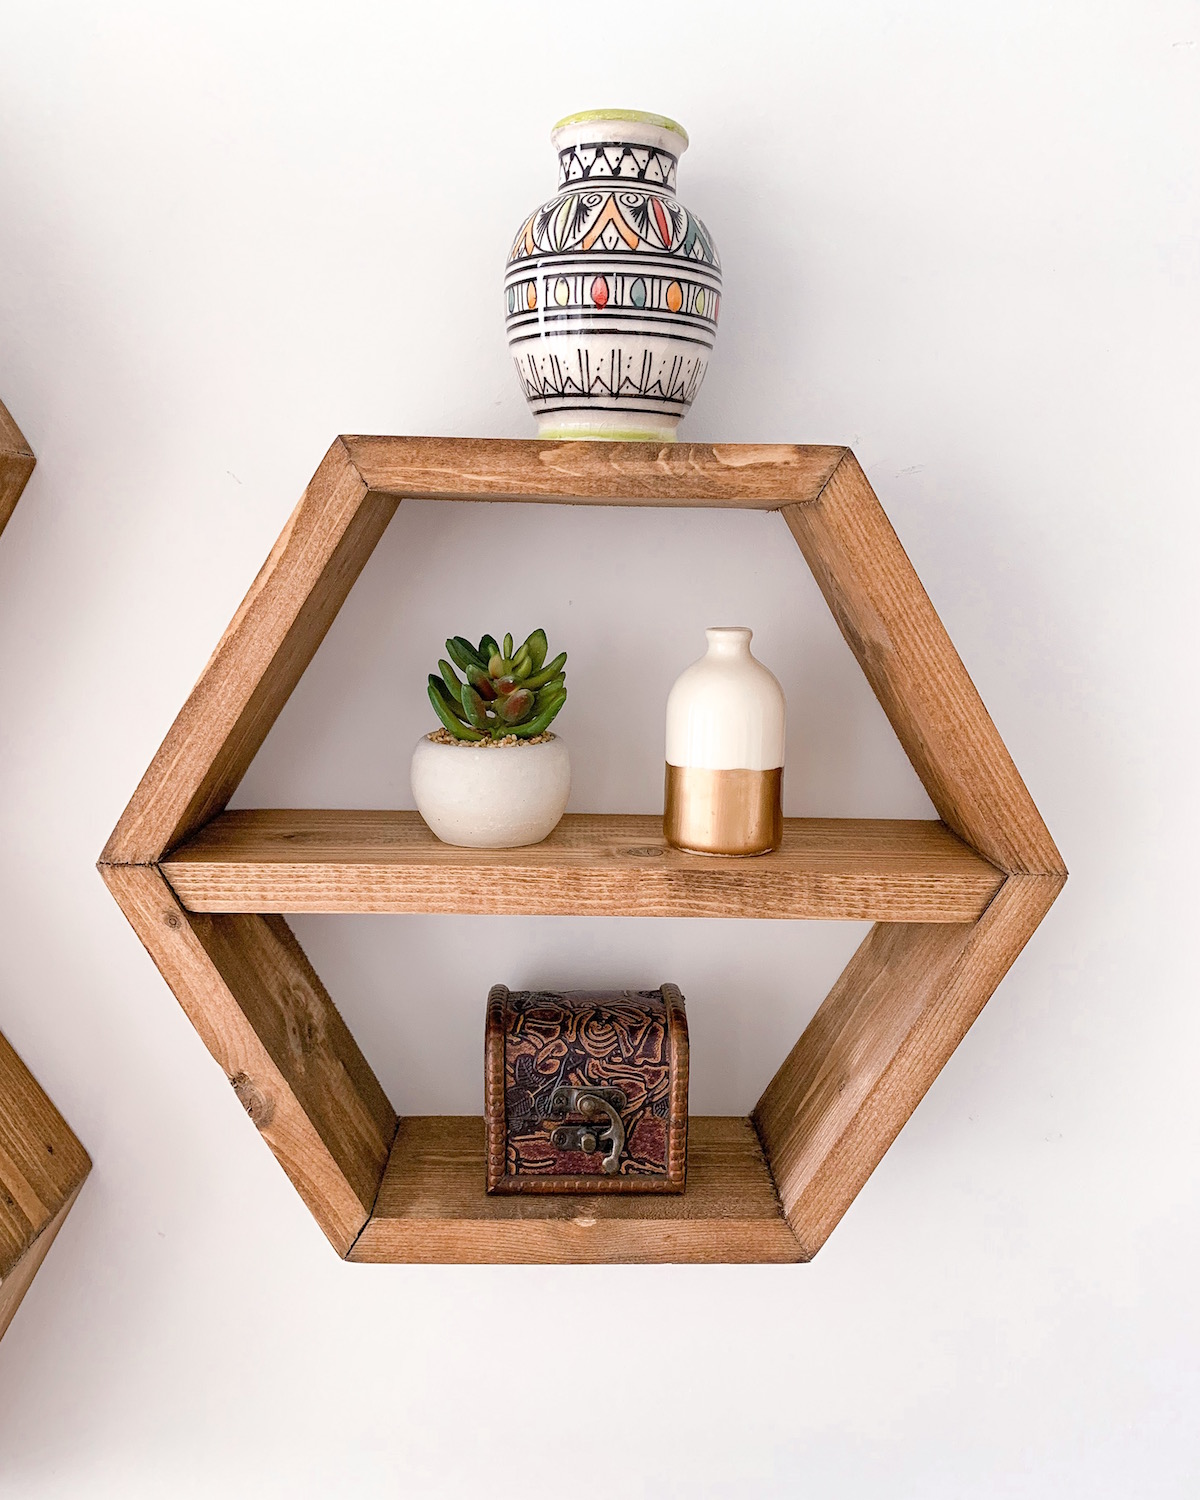 How To Decorate Honeycomb Shelves, Best Way To Hang Honeycomb Shelves